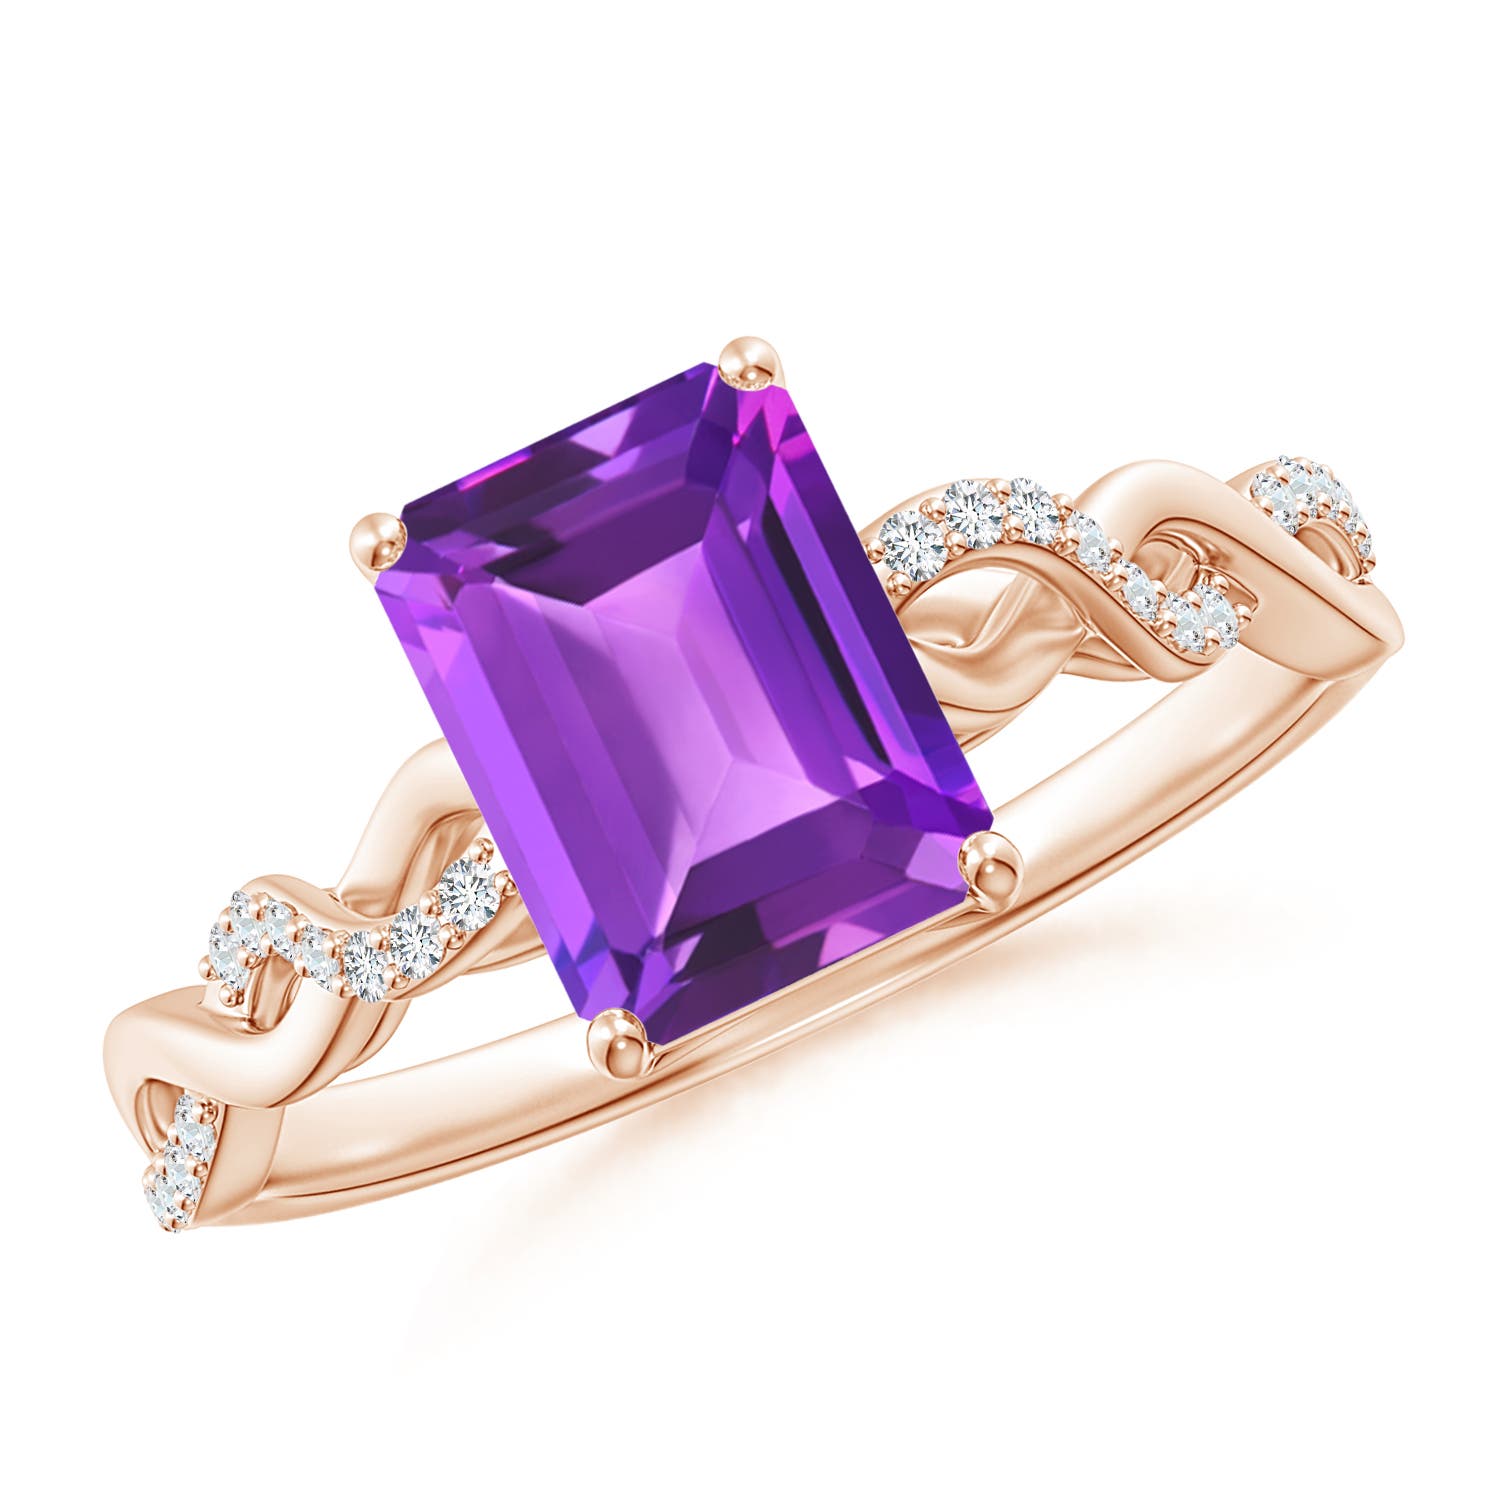 AAA - Amethyst / 1.63 CT / 14 KT Rose Gold